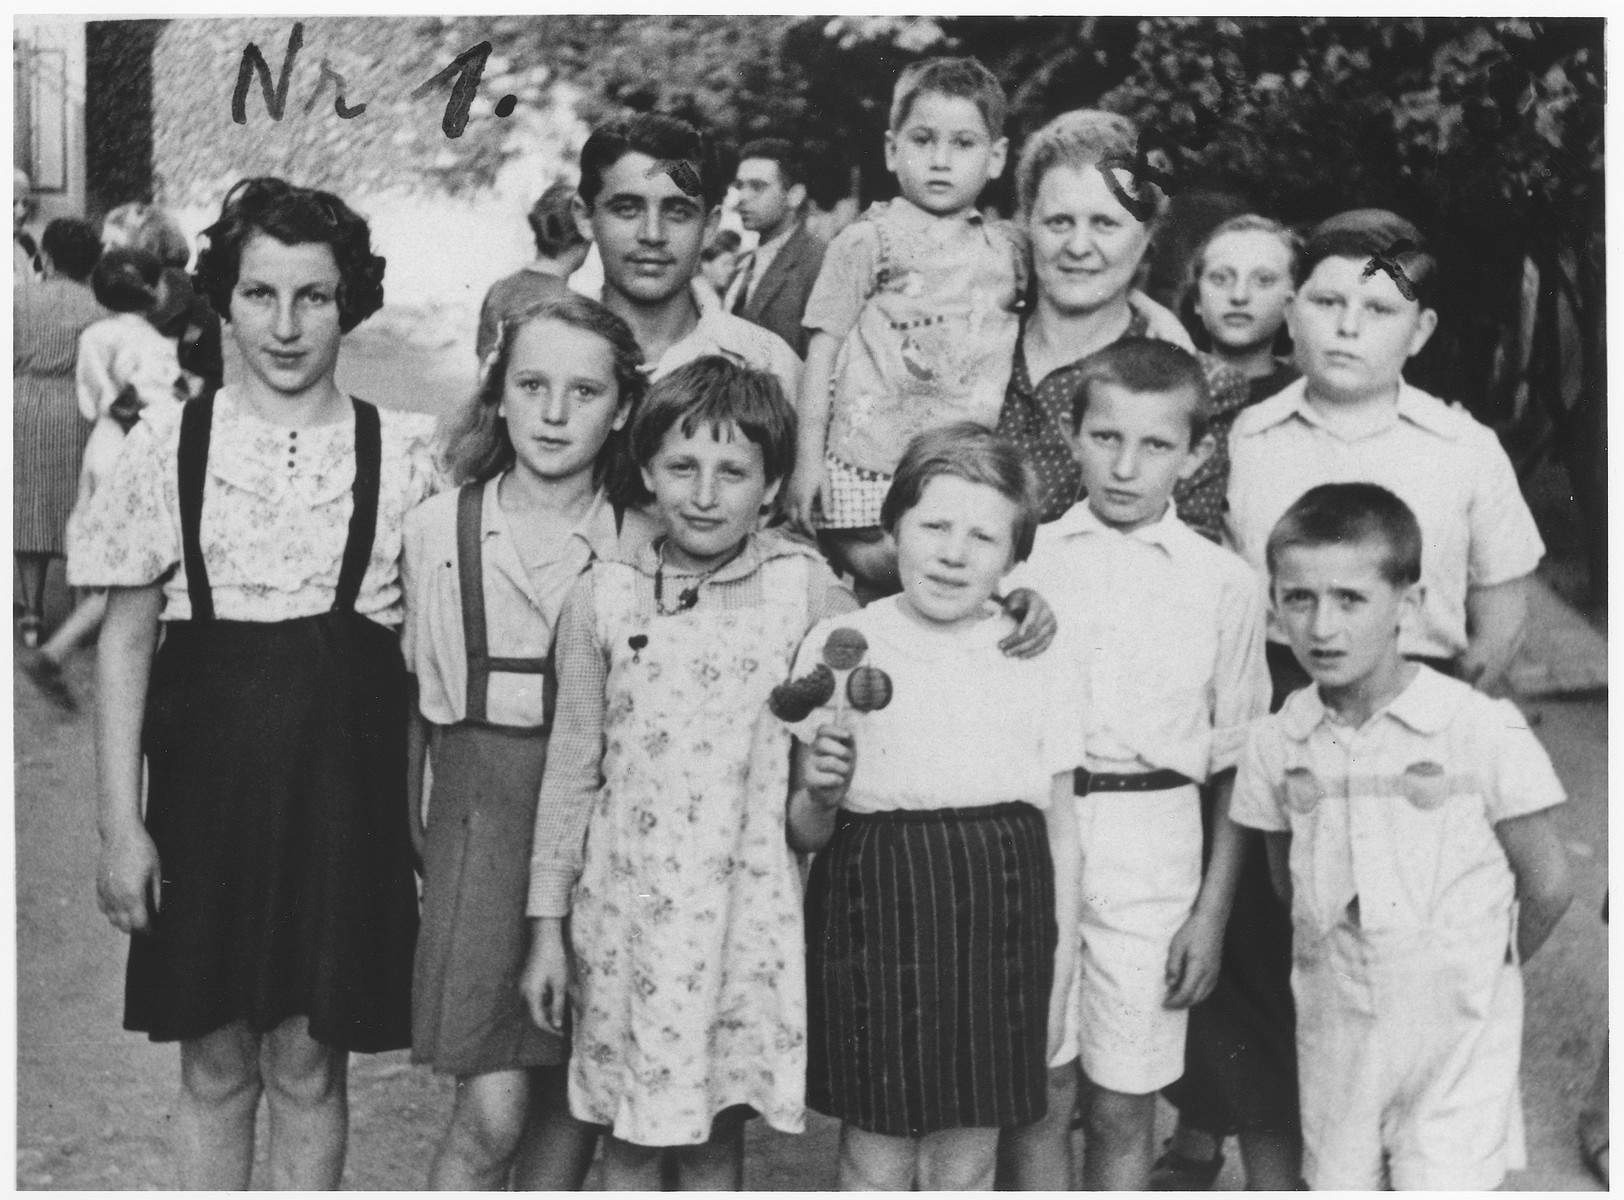 Anny (Hubner) Andermann poses with a group of orphans whom whe helped to have repatriated from Transnistria.

The boy on the right, Poldy, was a frequent visitor in the Andermann home.